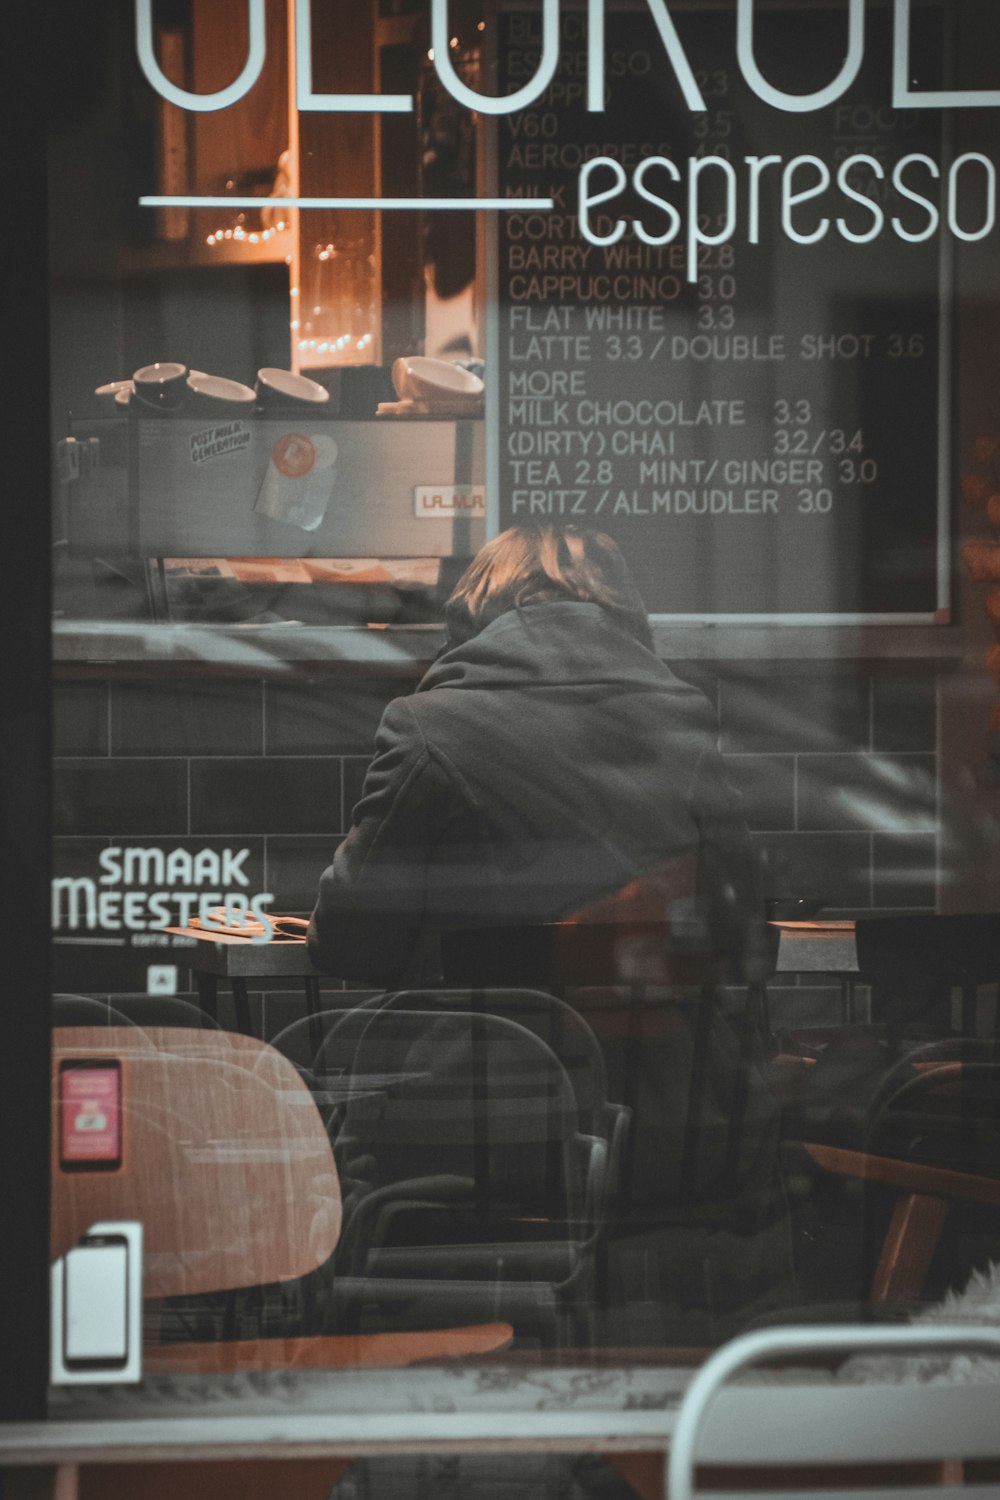 a person sitting at a table in front of a window